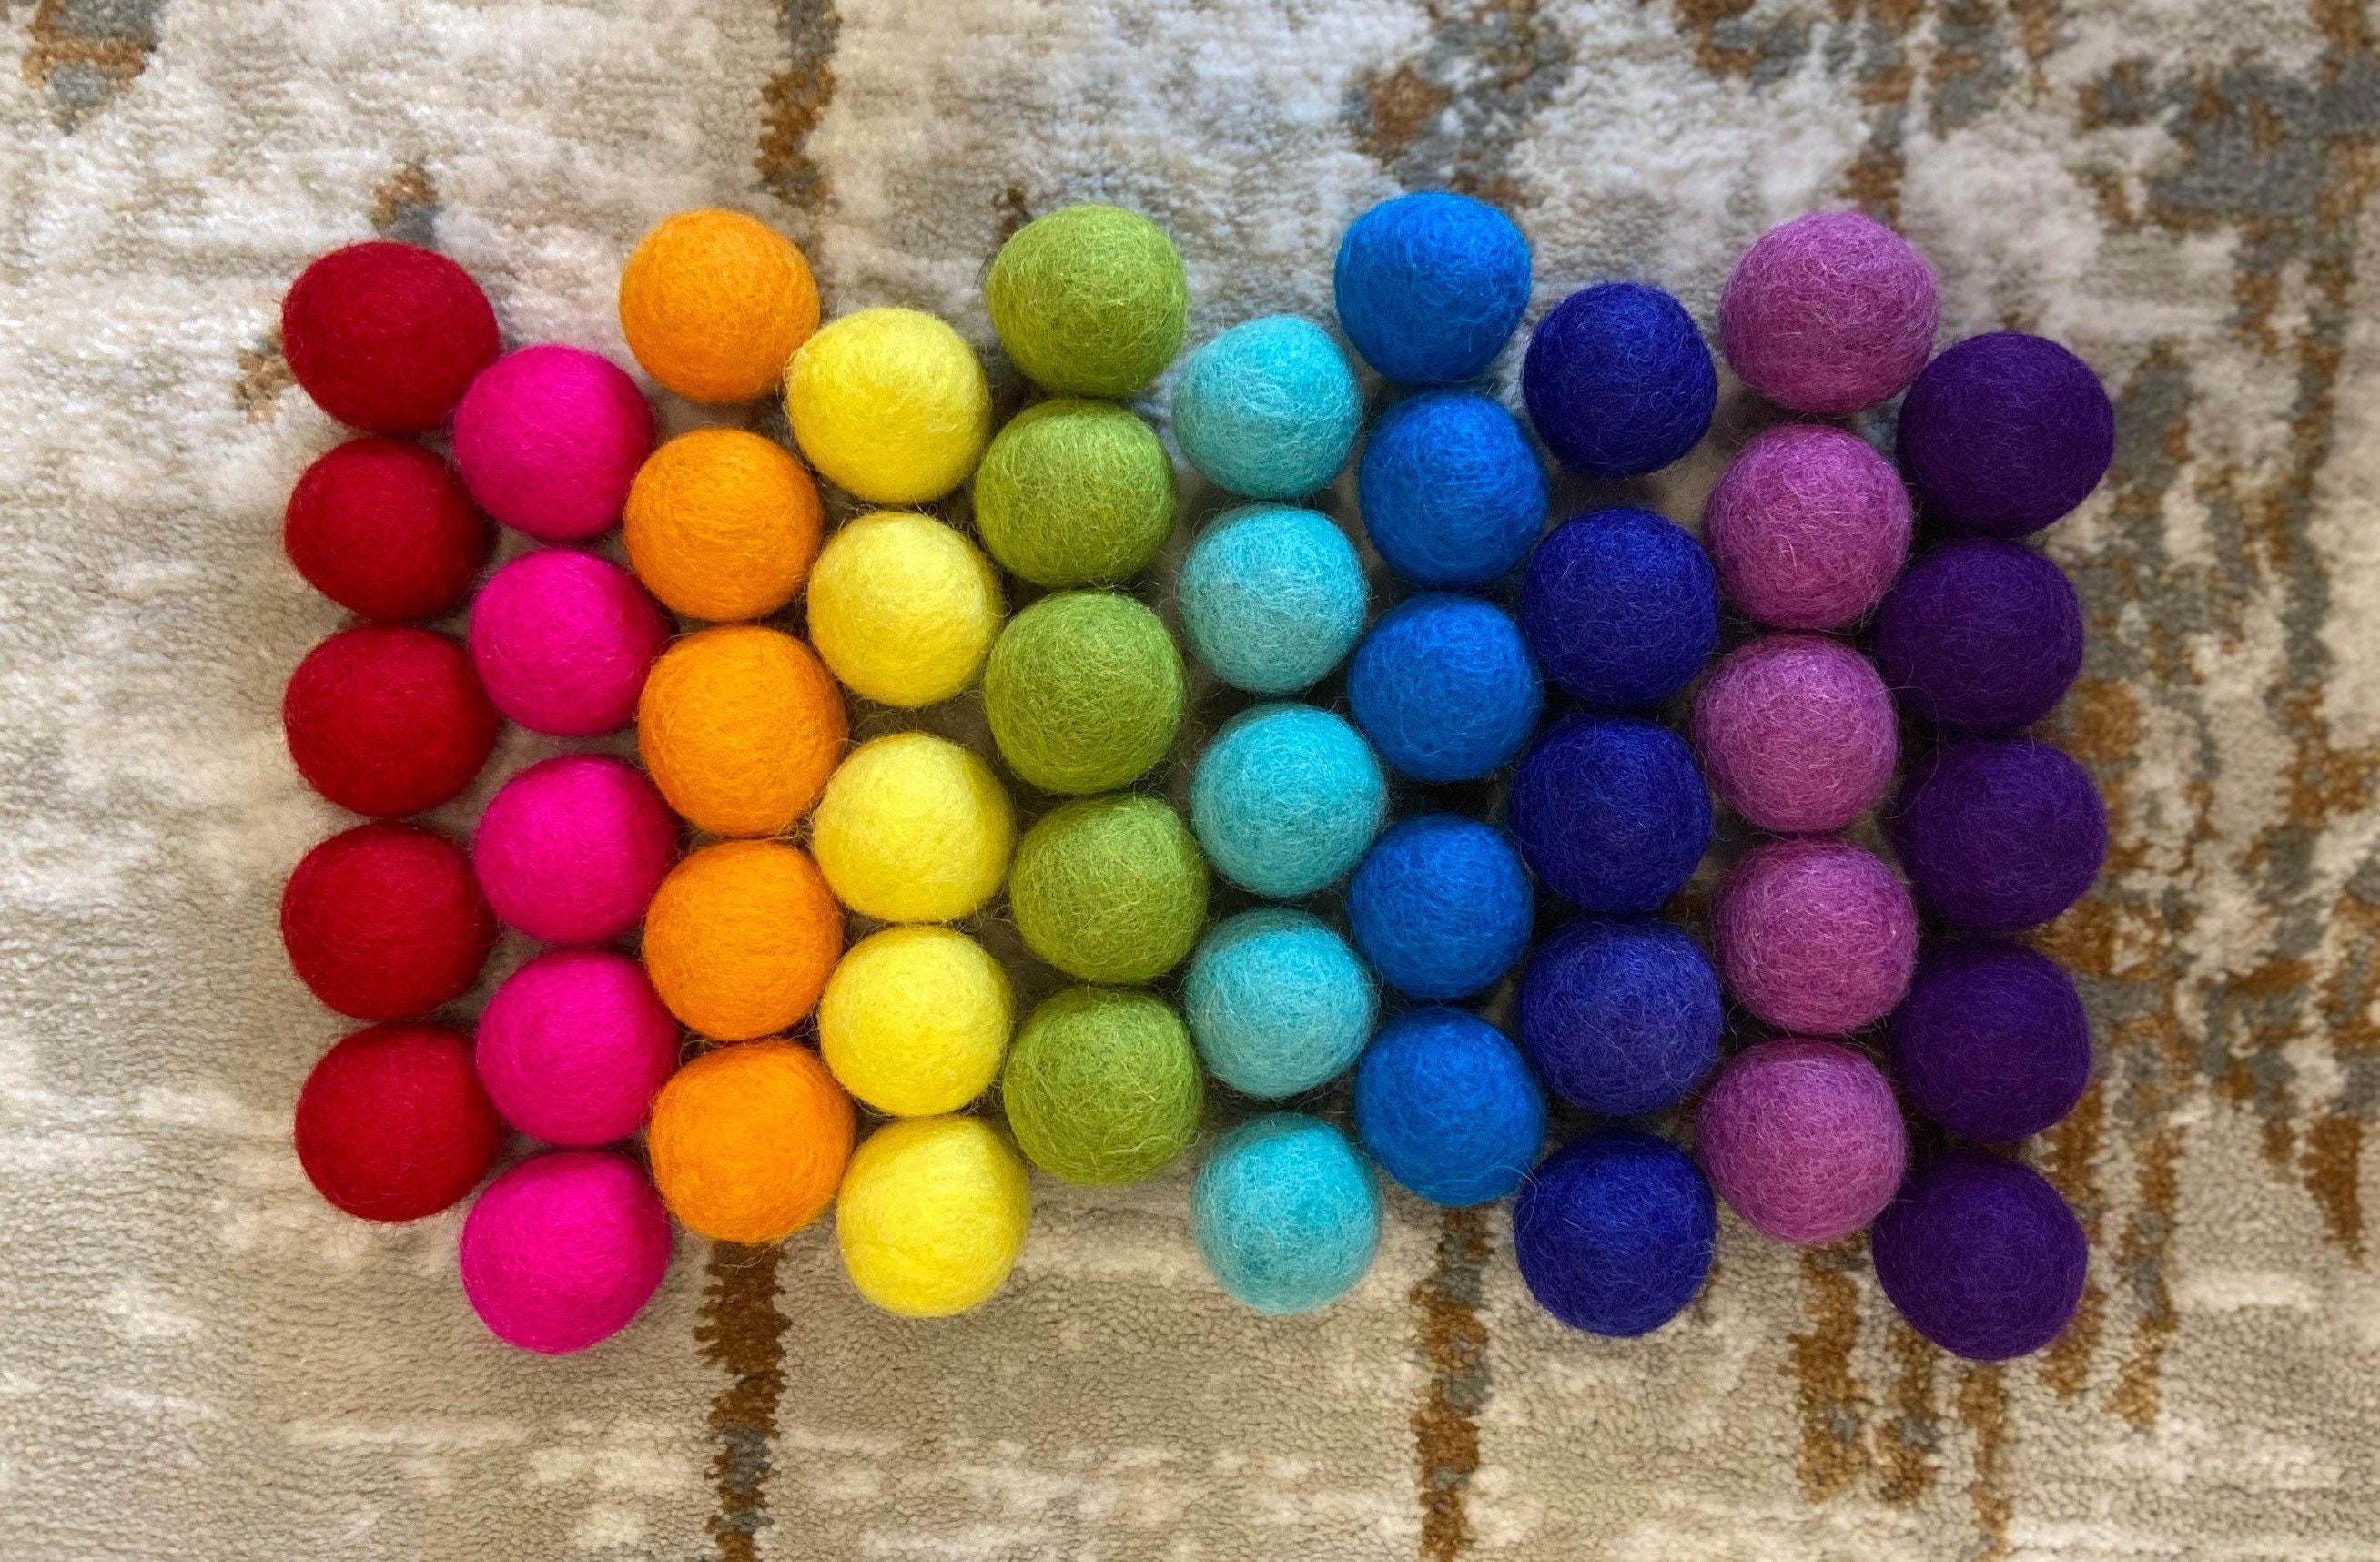 100PCS 20mm 100% Wool Felt Balls DIY Balls Hanging Accessories Candy Color  Pom Pom Ball For Kids Party Crafts Children's Toys